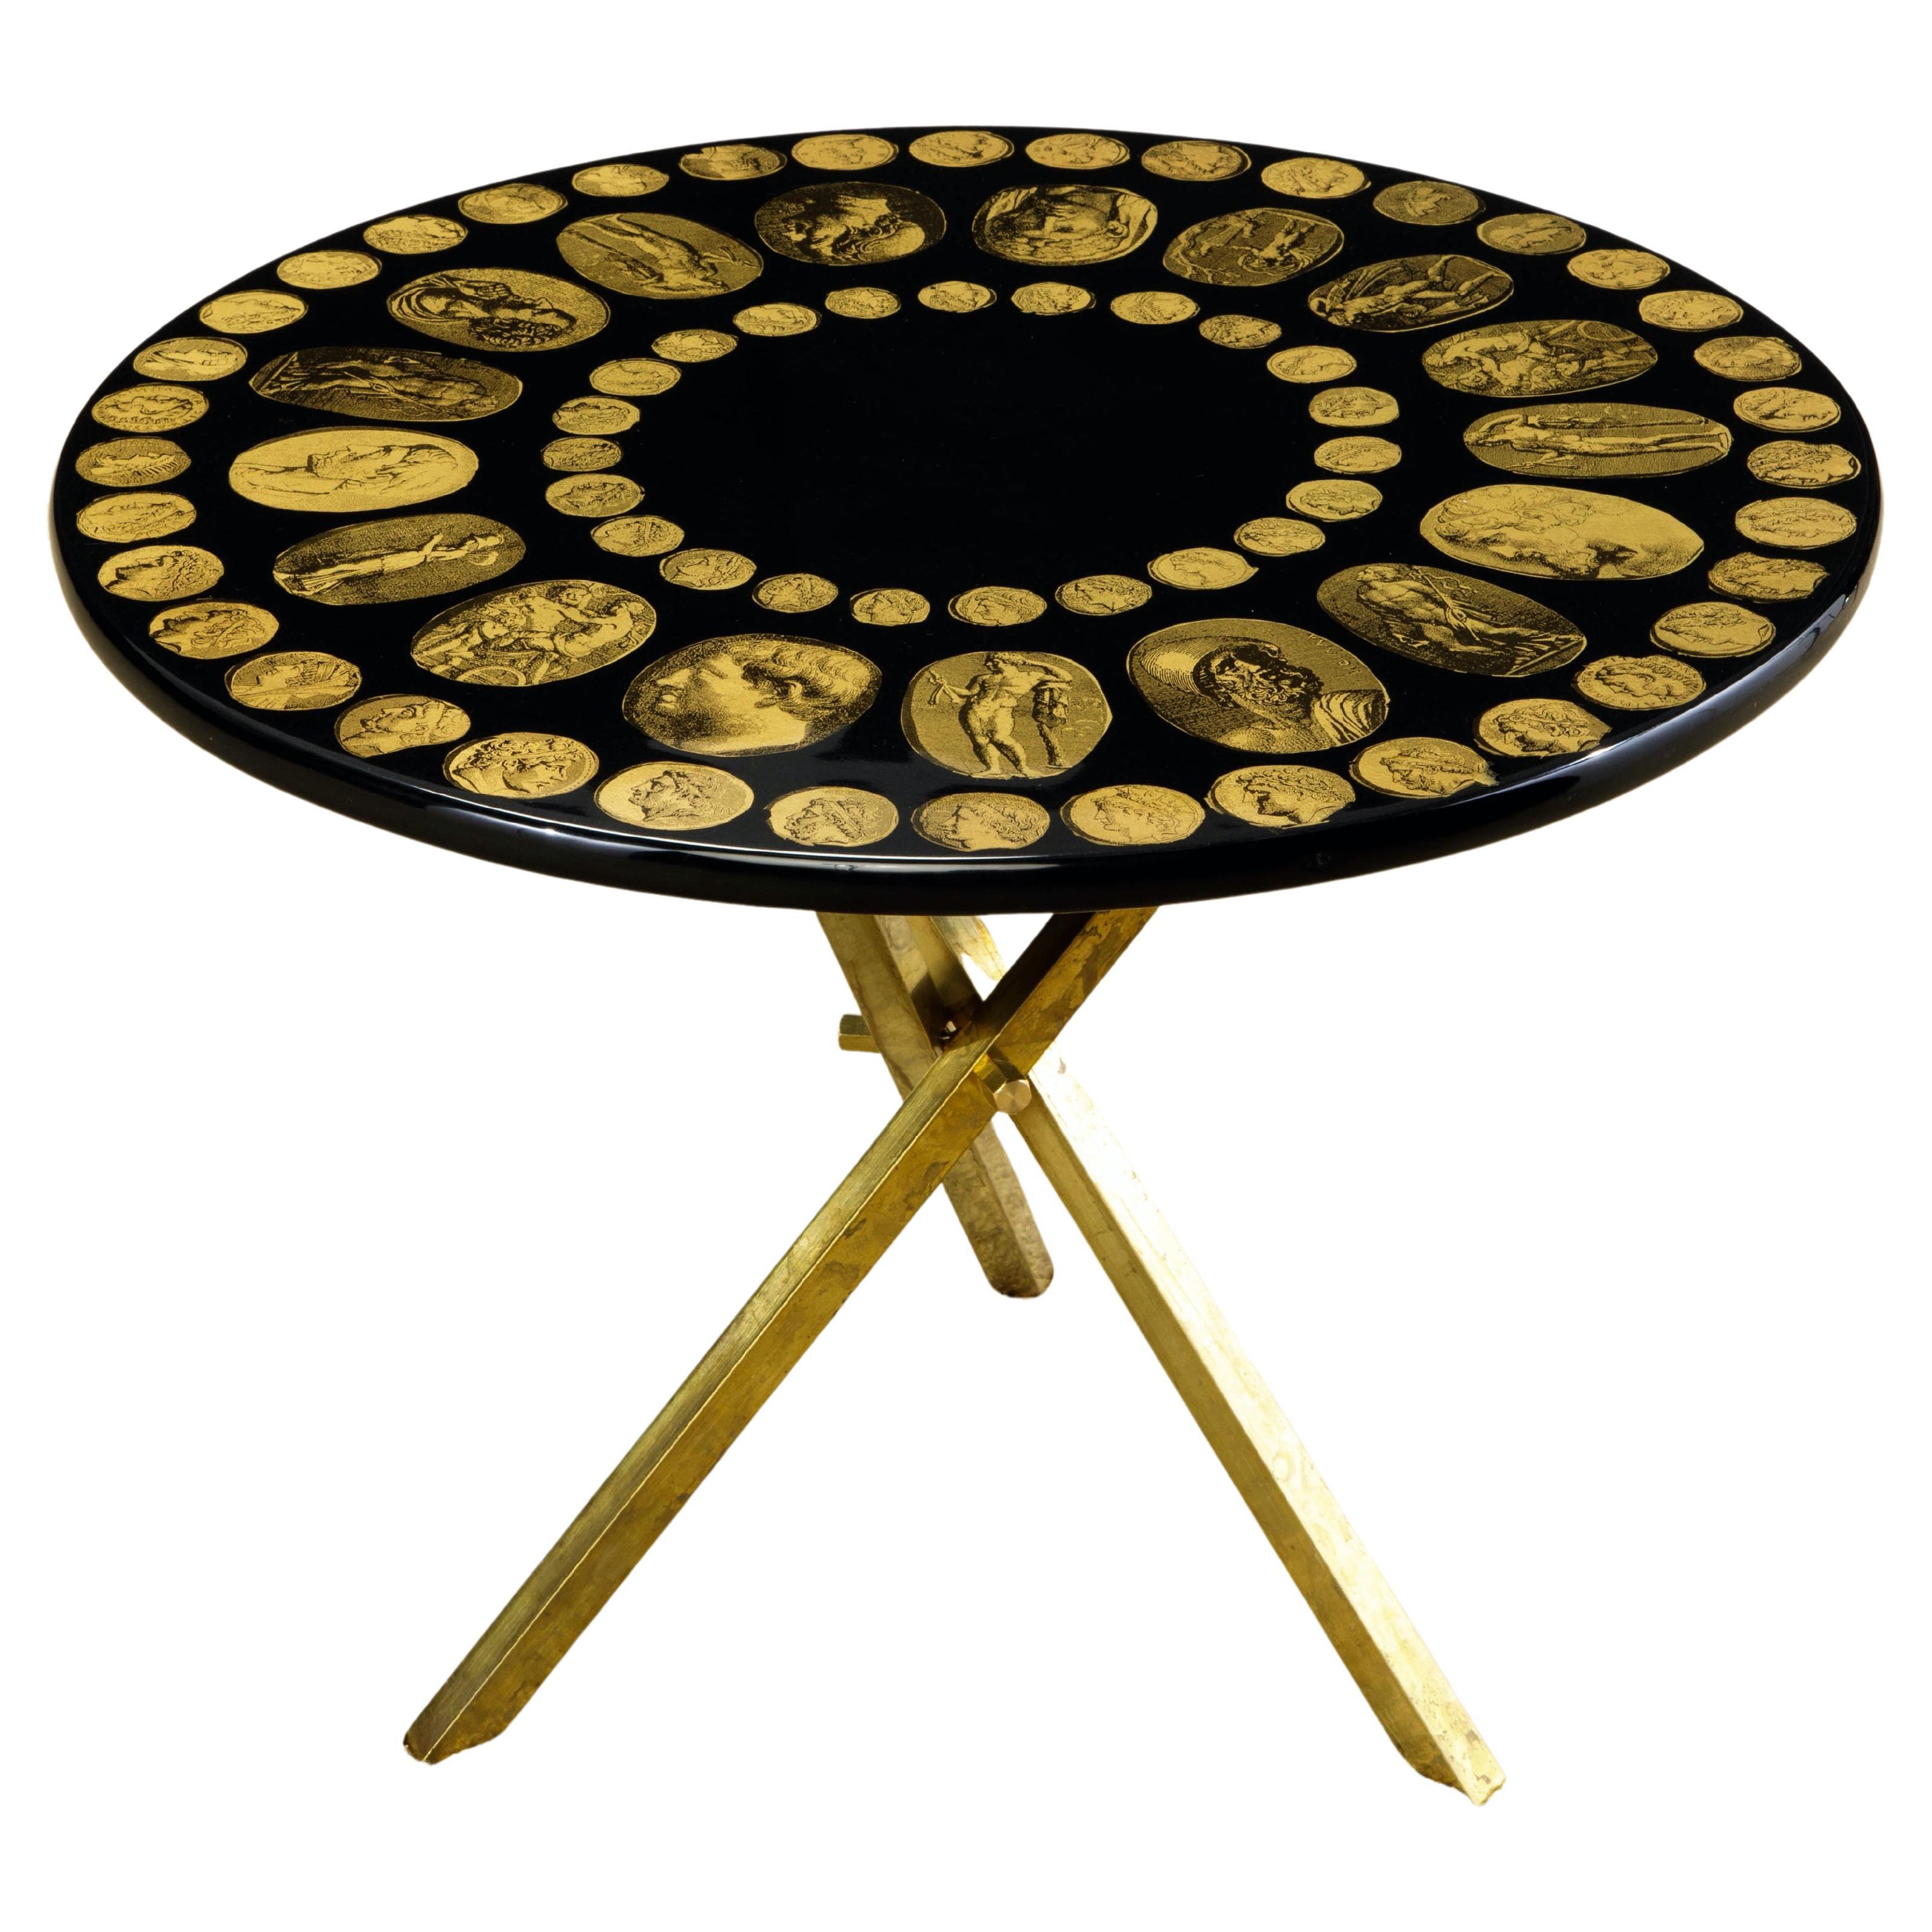 'Cammei' Lacquered Wood and Brass Side Table by Piero Fornasetti, Signed 